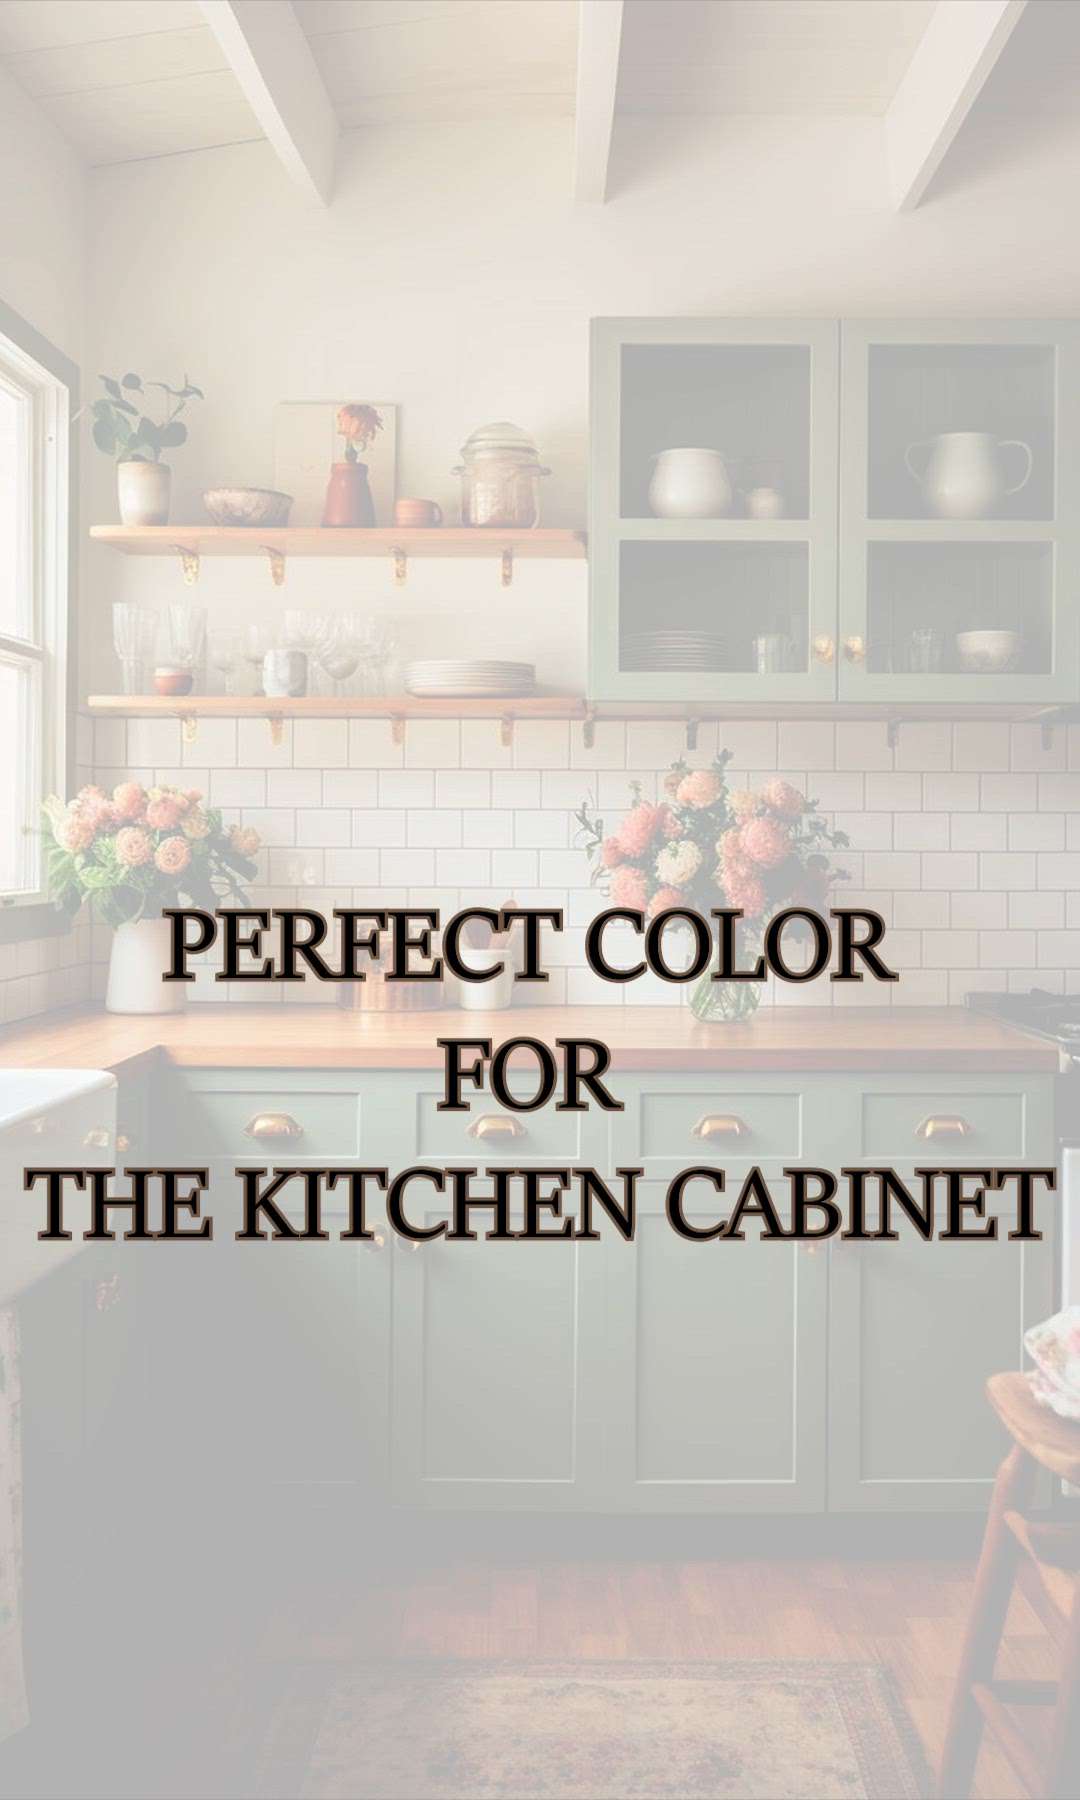 How to the best color for your kitchen cabinet.

#kitchen #kitchencabinet #KitchenIdeas #KitchenInterior #interiortips #InteriorDesigner #interiorideas #designtips #interior #colors #designs #kolo #creators  #home #house